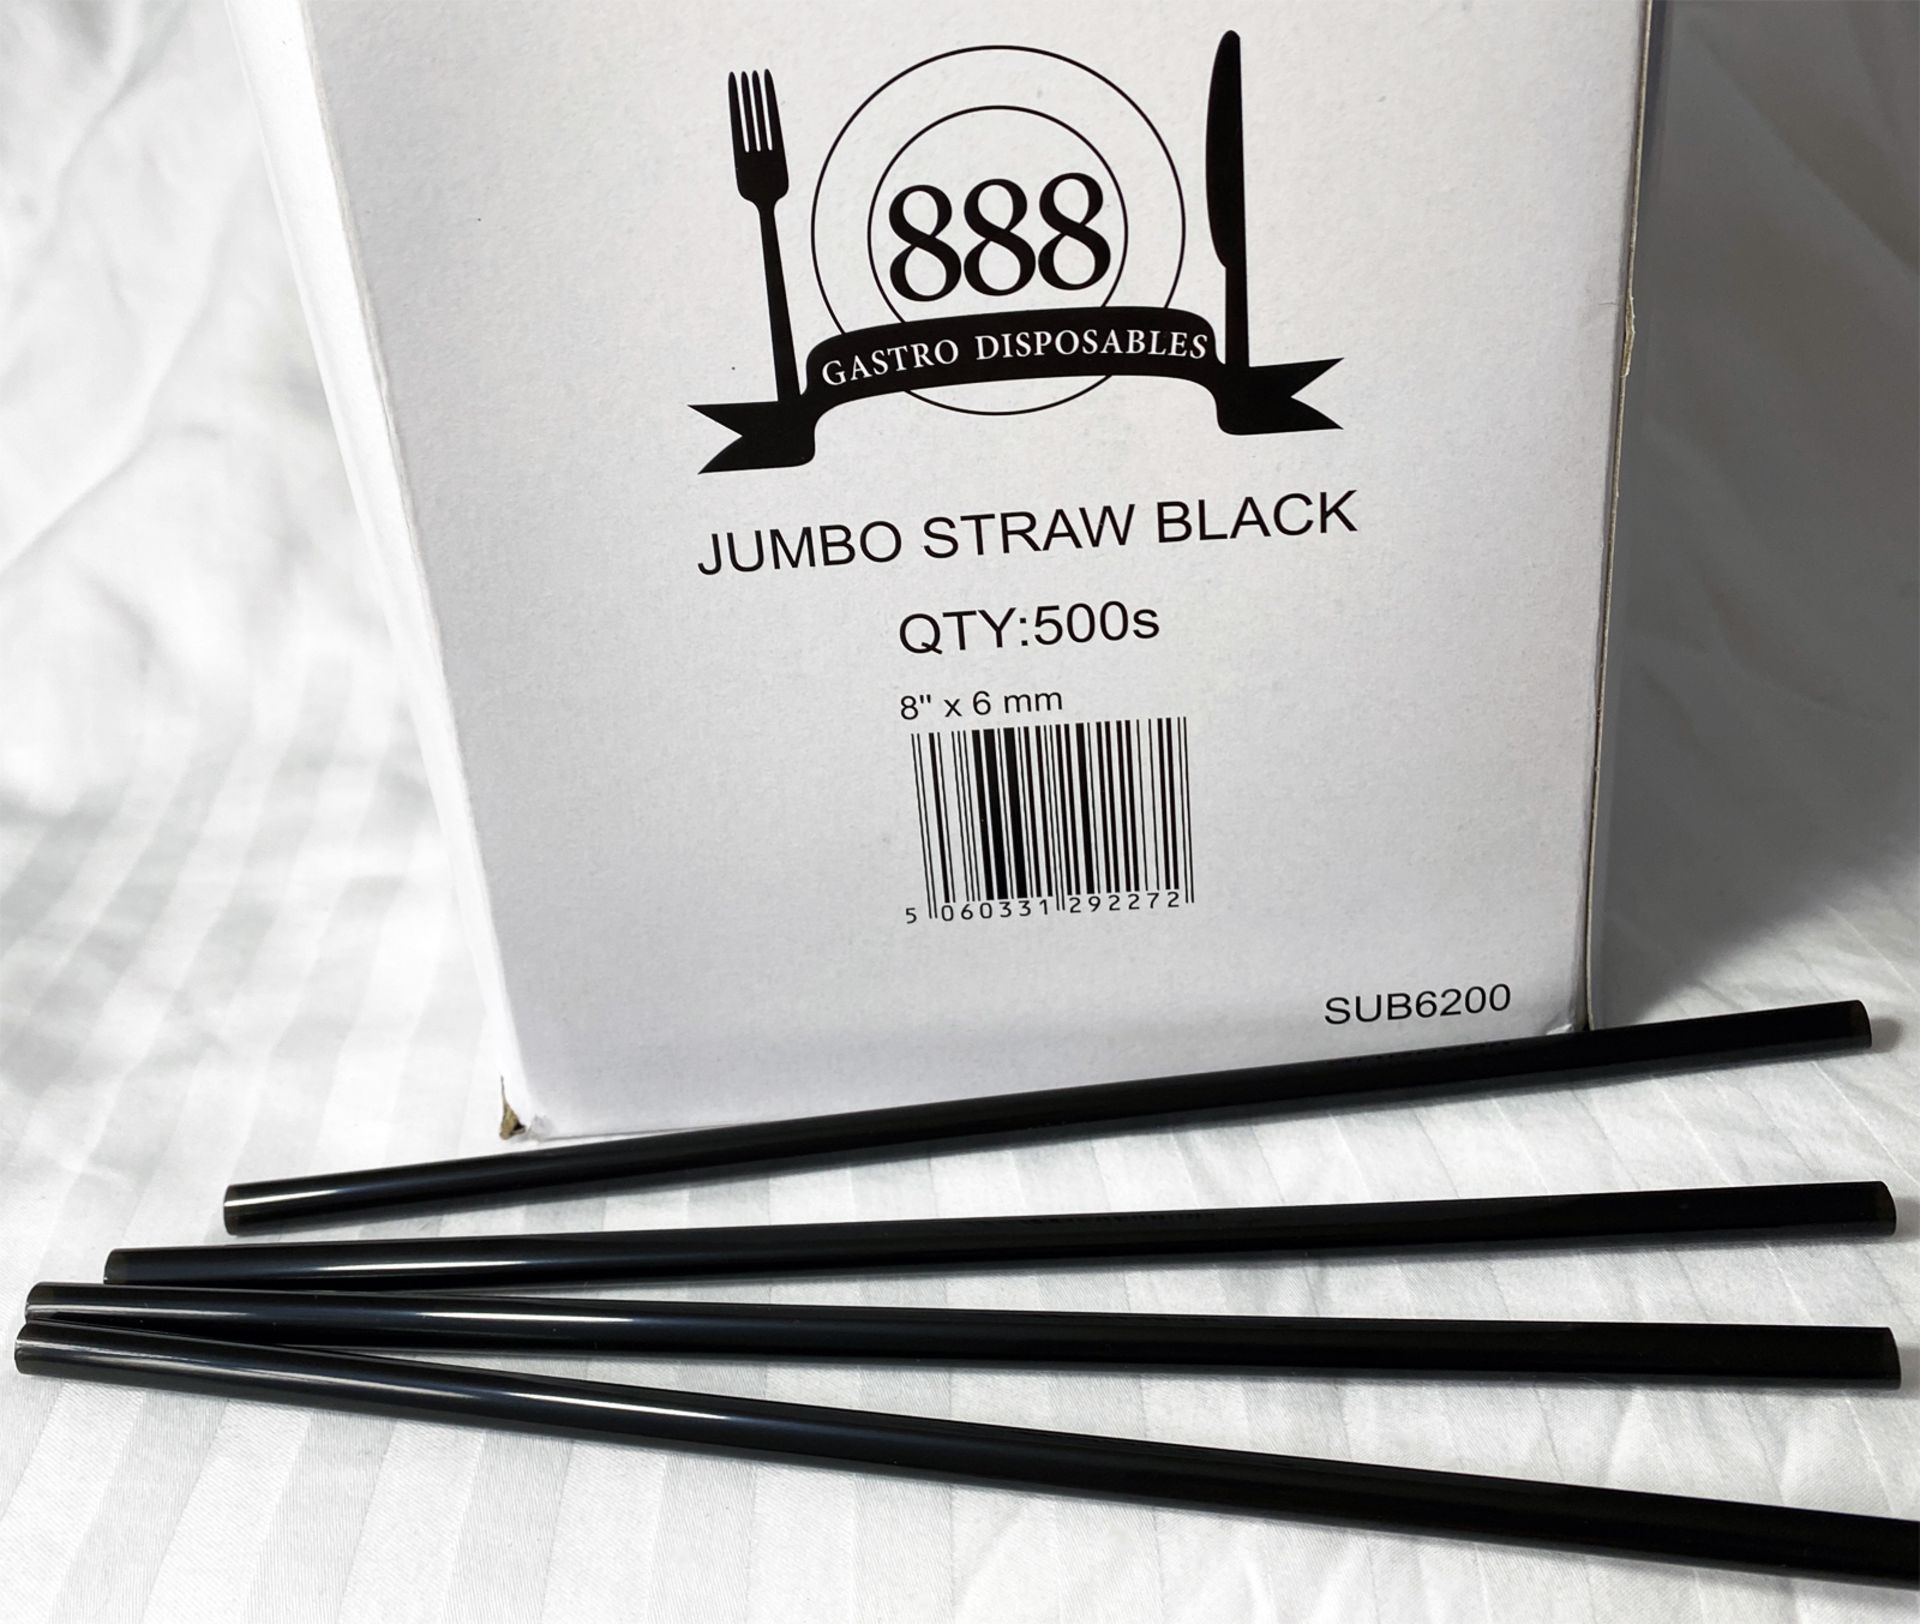 240000 X Jumbo Straw Black Straight 8" x 6mm in 24 boxes COLLECTION RADCLIFFE